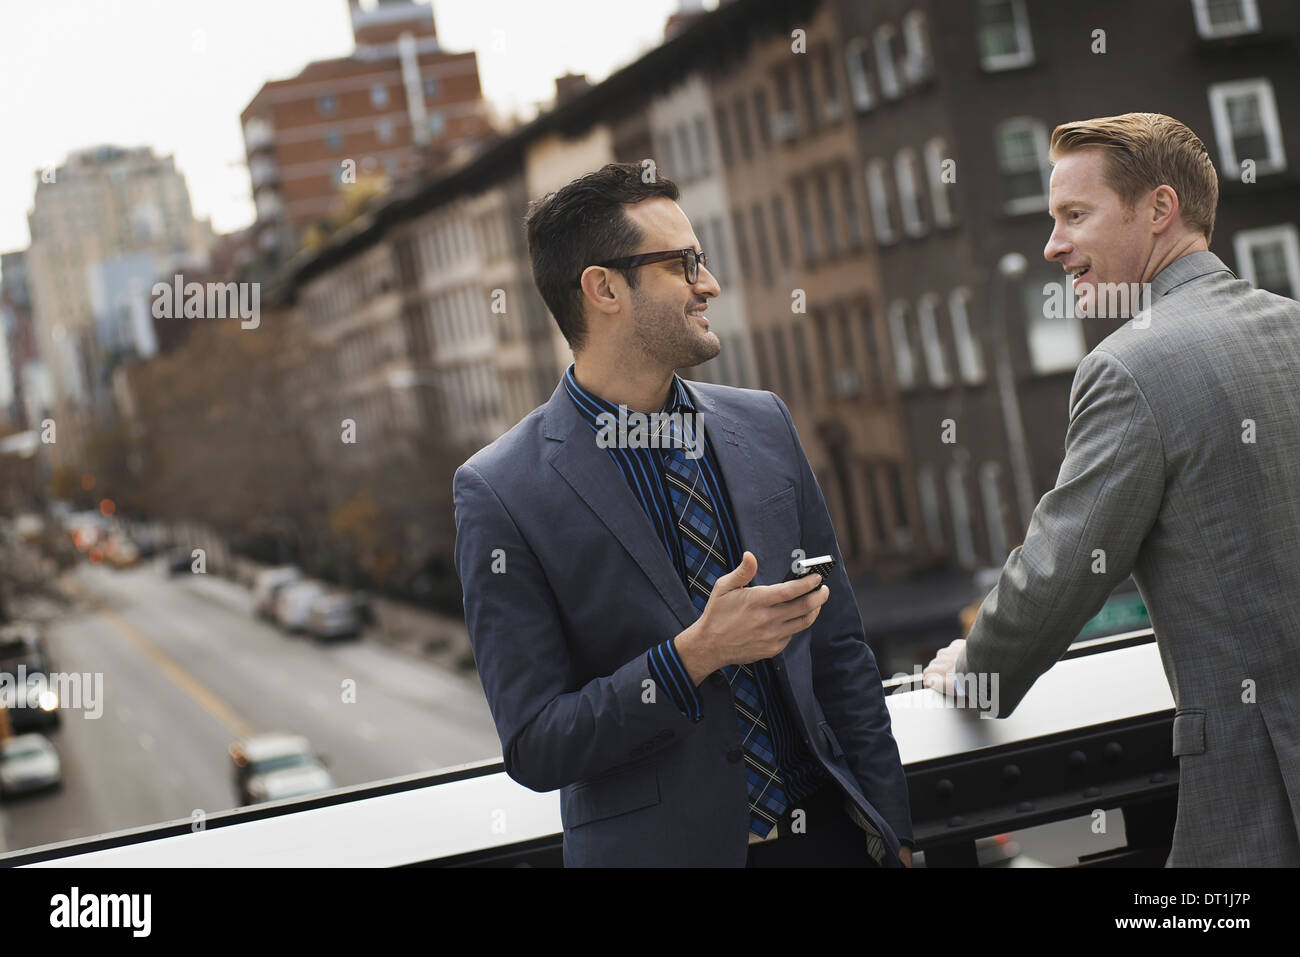 Two men standing talking on an elevated walkway above a city road Stock Photo